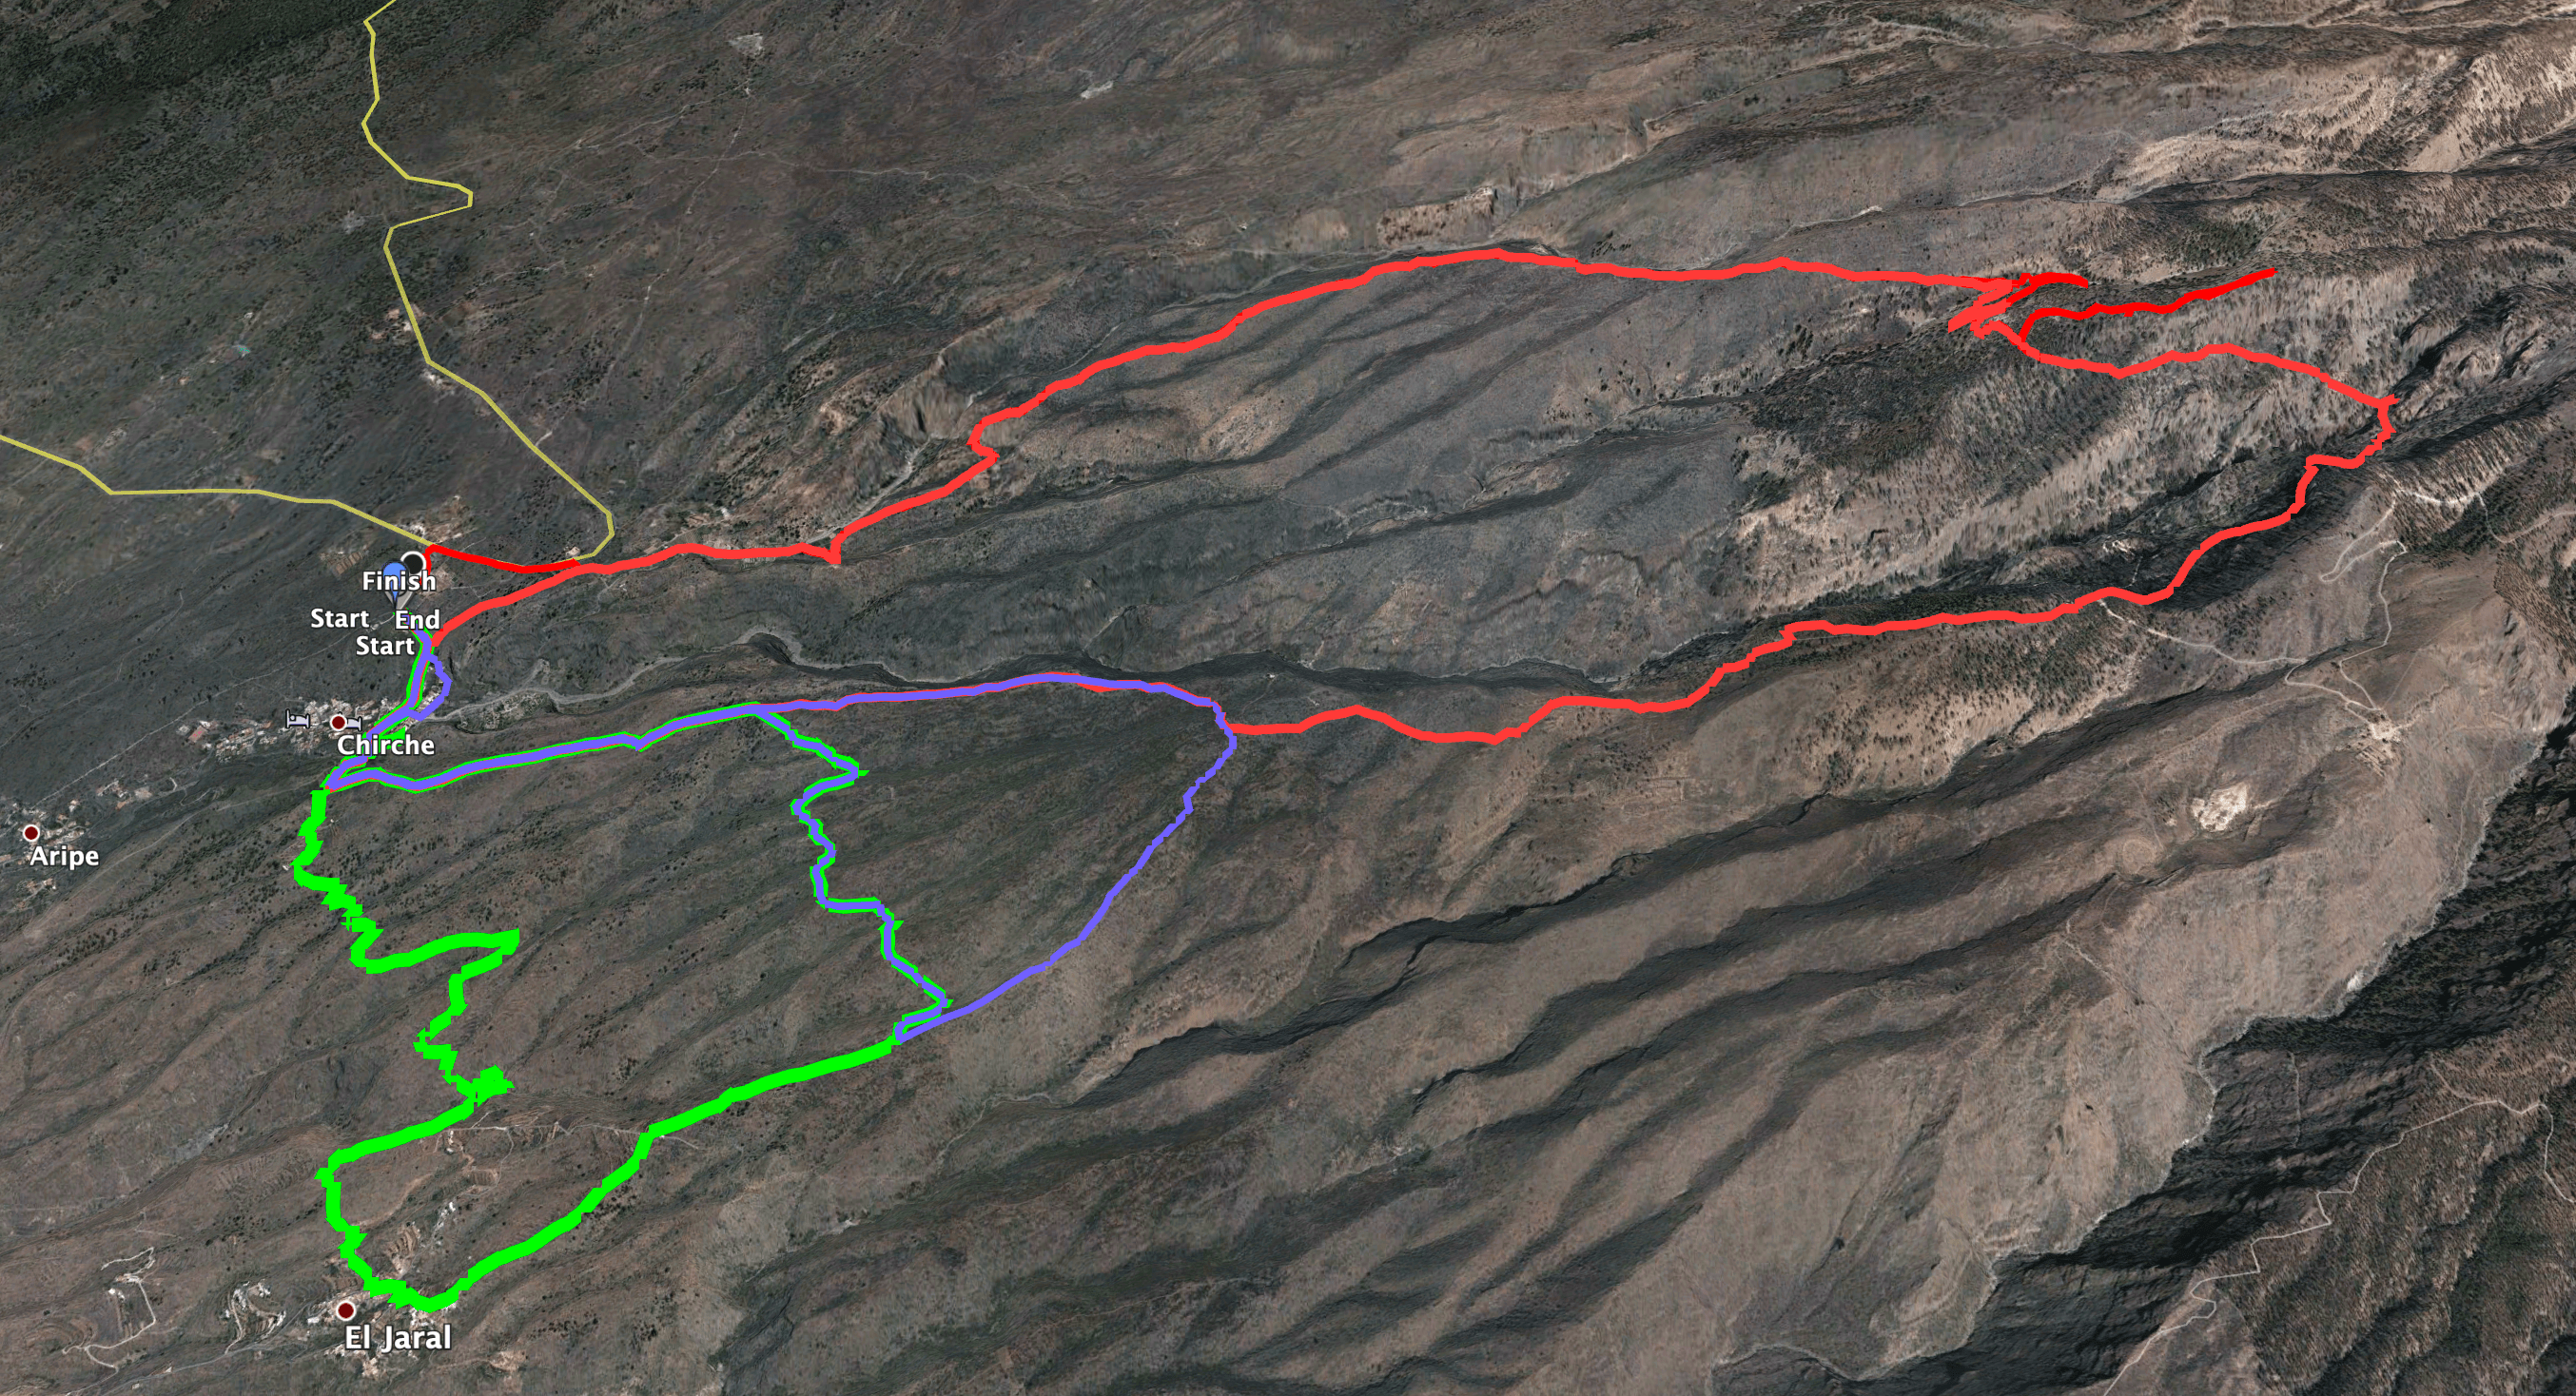 Track of the hike Chirche - Barranco de Tagara and small round trips (extensions) via El Jaral